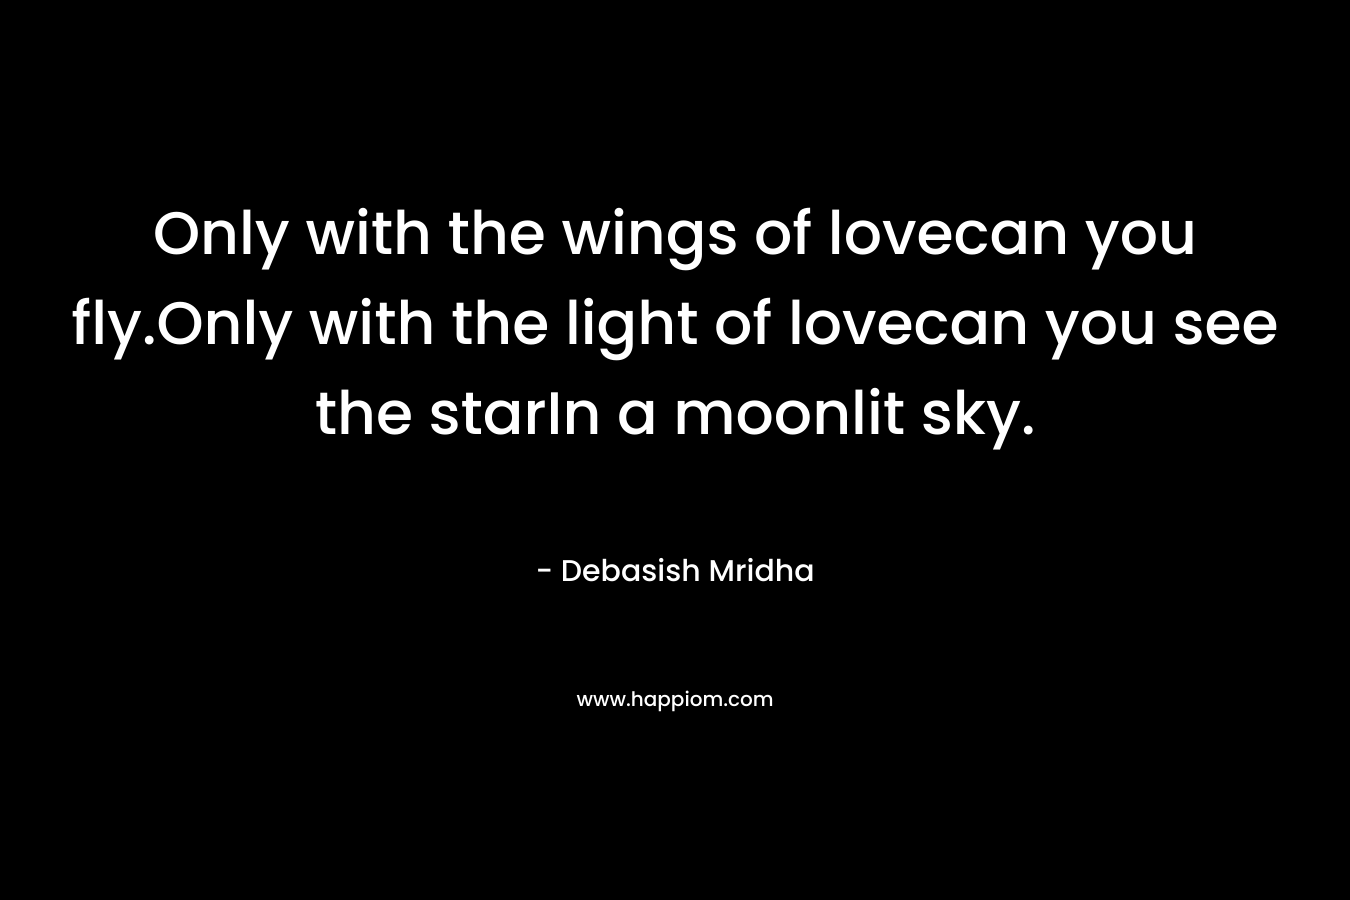 Only with the wings of lovecan you fly.Only with the light of lovecan you see the starIn a moonlit sky.